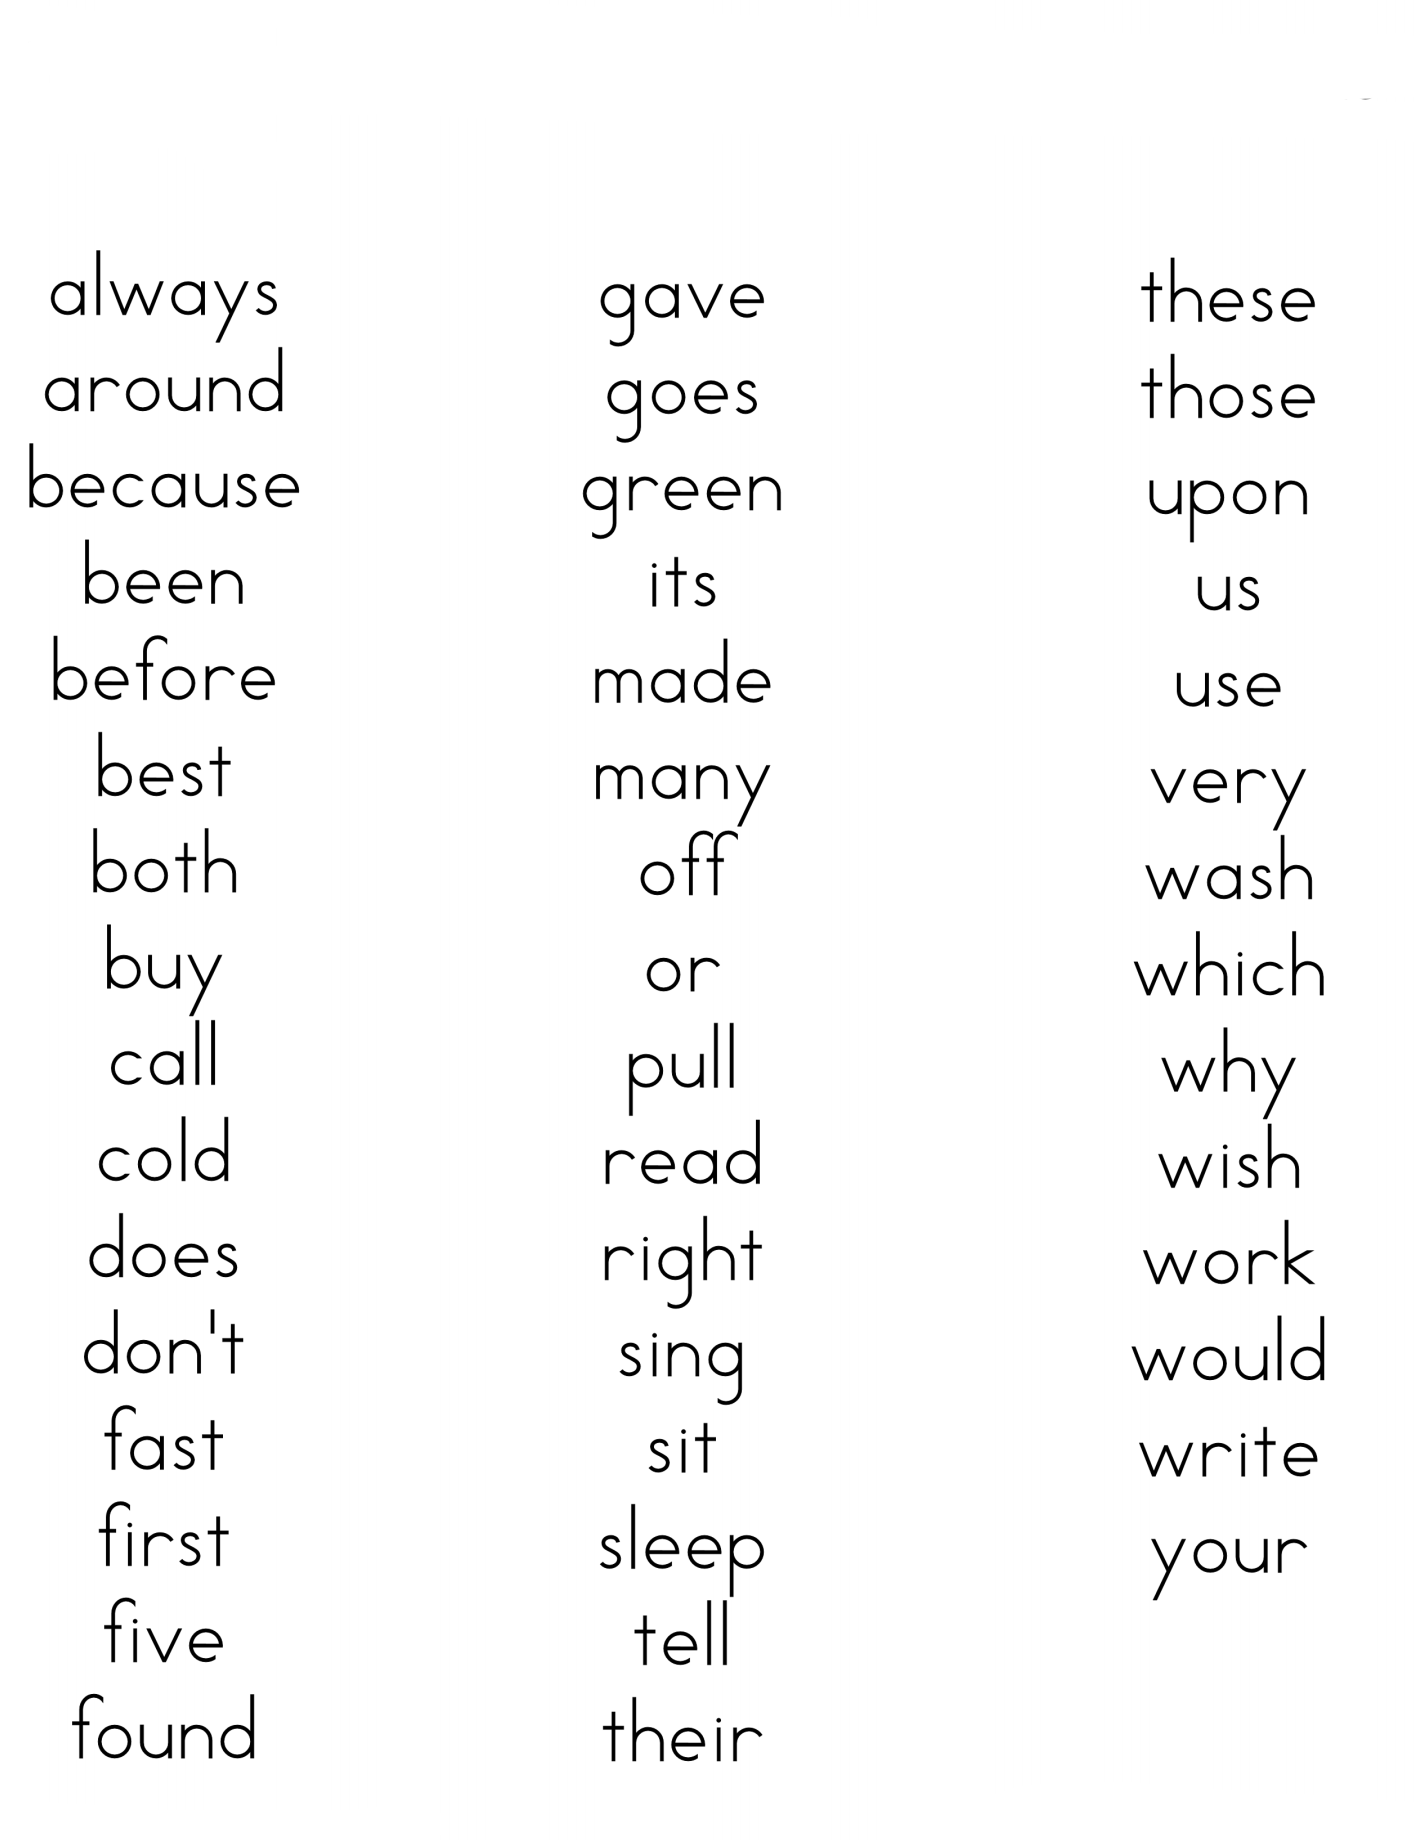 6th grade dolch sight word list